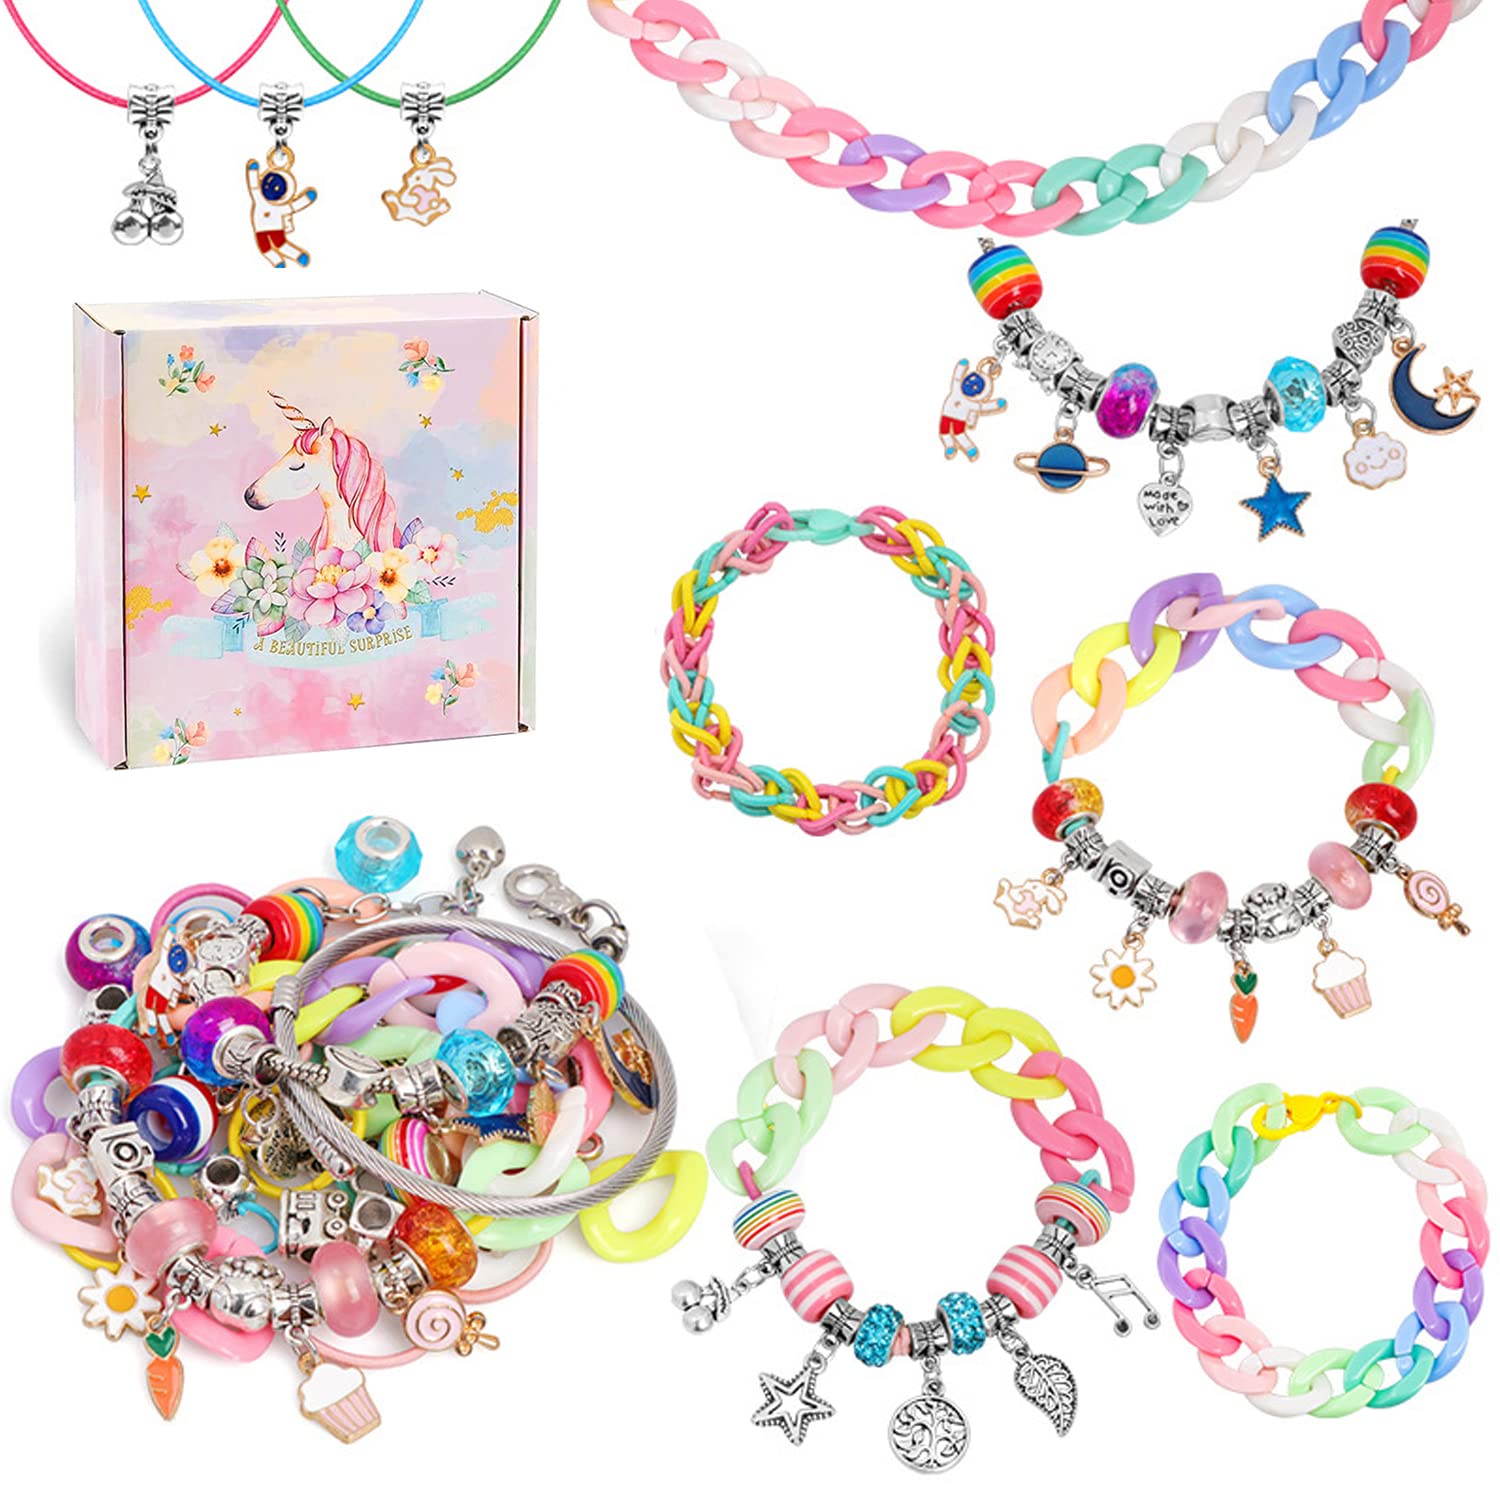 Amazon.com: Mckanti 150 Pieces Charm Bracelet Making Kit for Girls, Charm  Bracelets Jewelry Making Kit with Beads Bracelets Charms Necklace DIY  Crafts Gifts Set for Teen Girls Kids Age 5-12